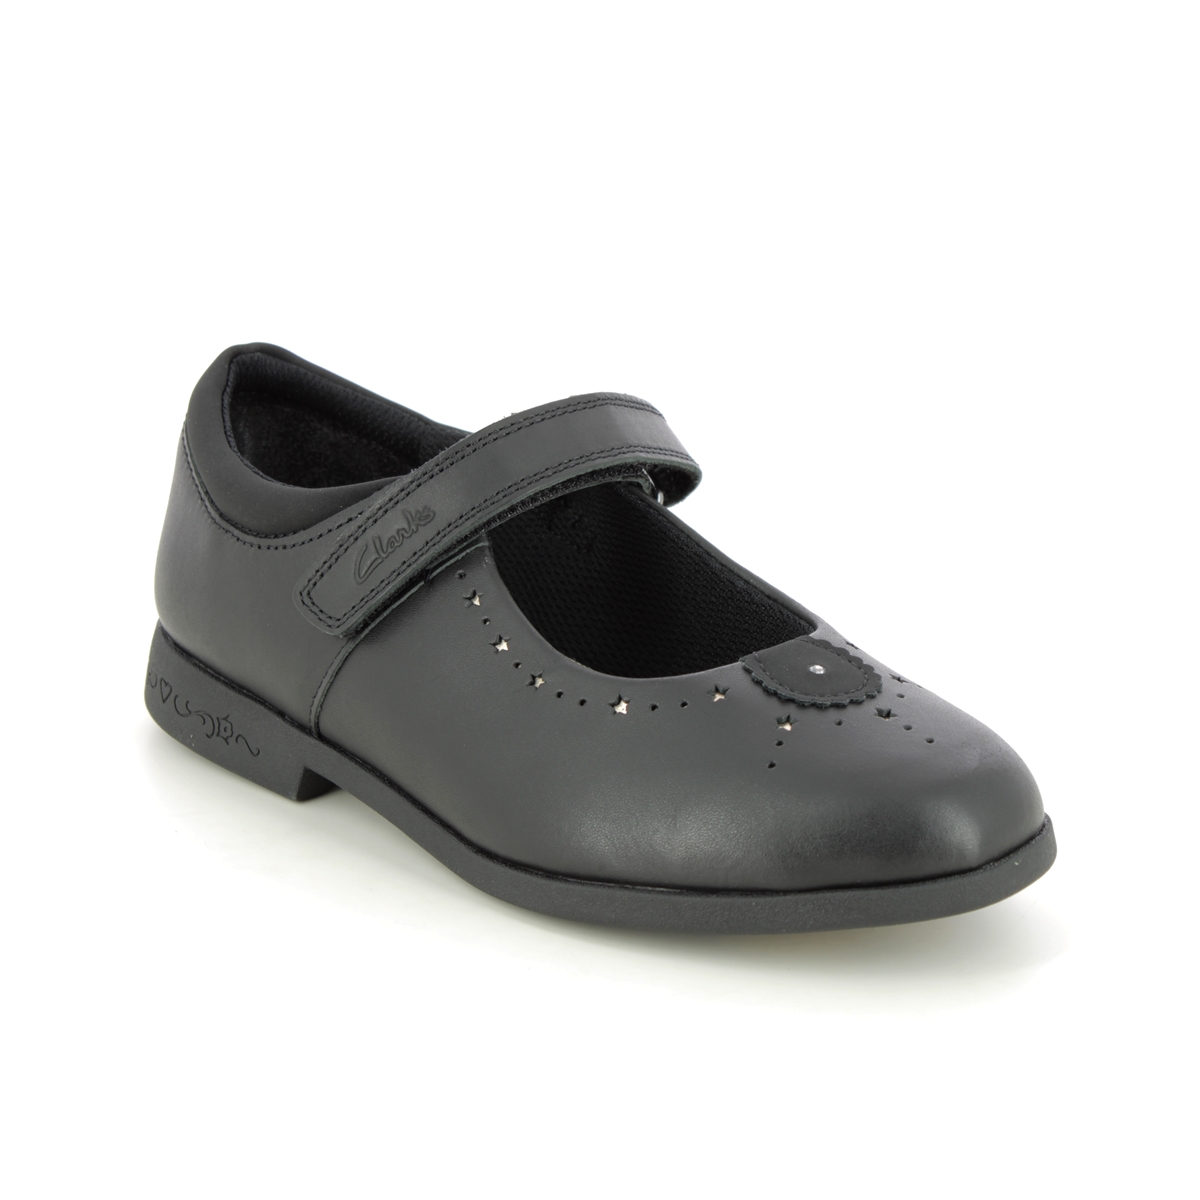 Clarks Magic Step Mj O Black leather Kids girls school shoes 6970-58H in a Plain Leather in Size 13